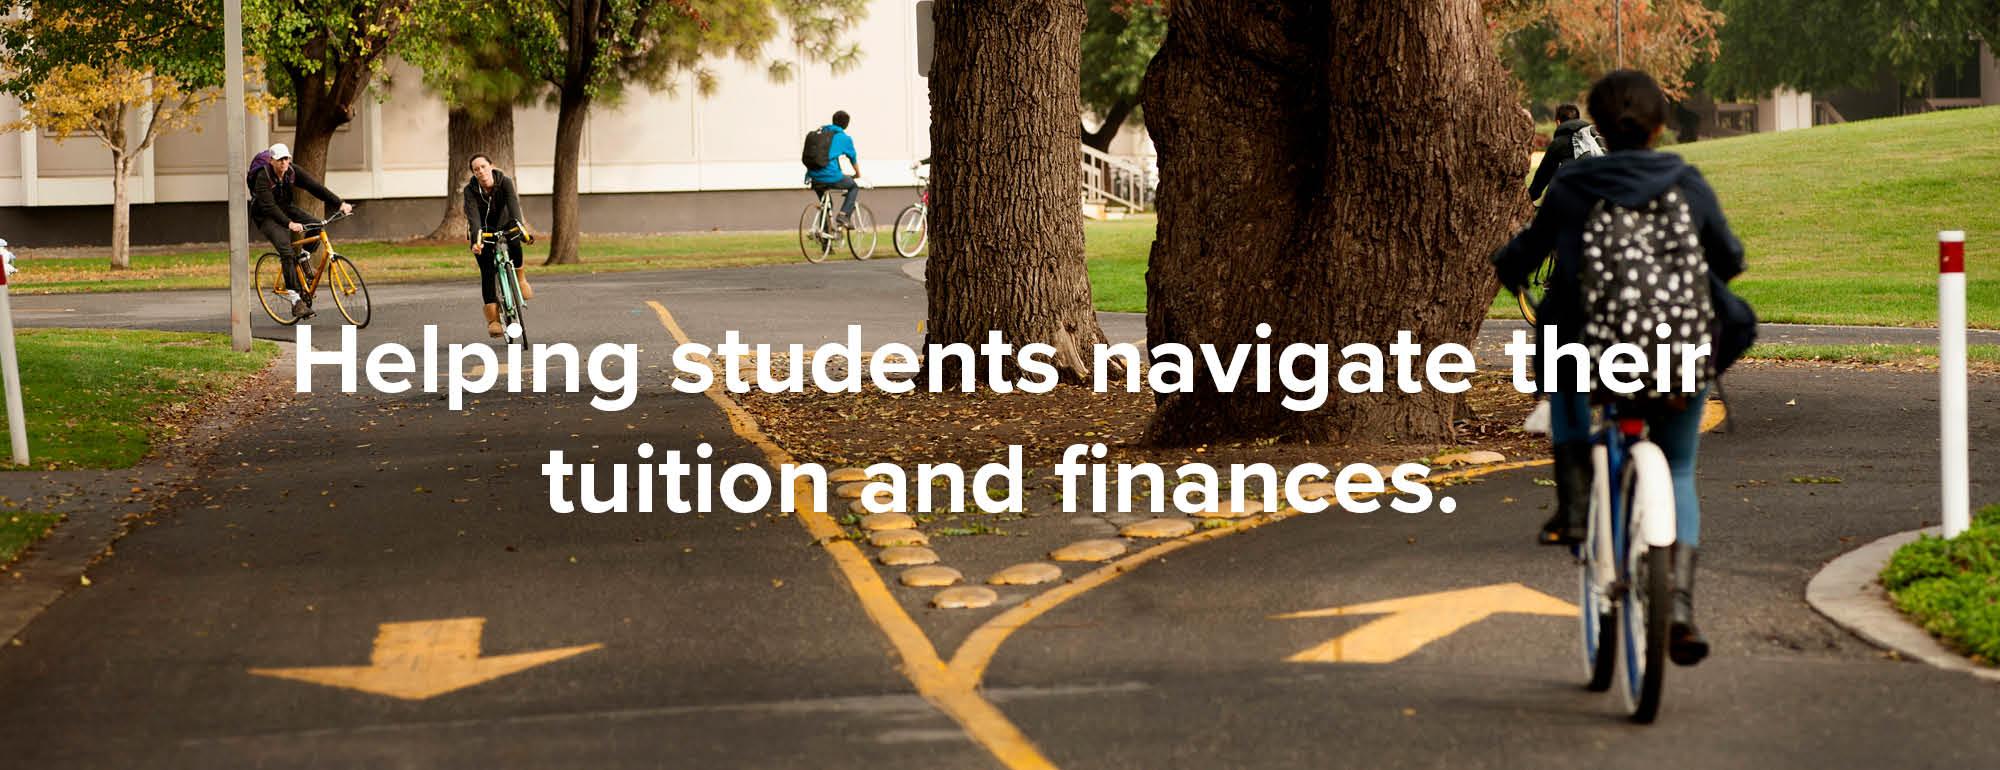 Students on two-directional bike path